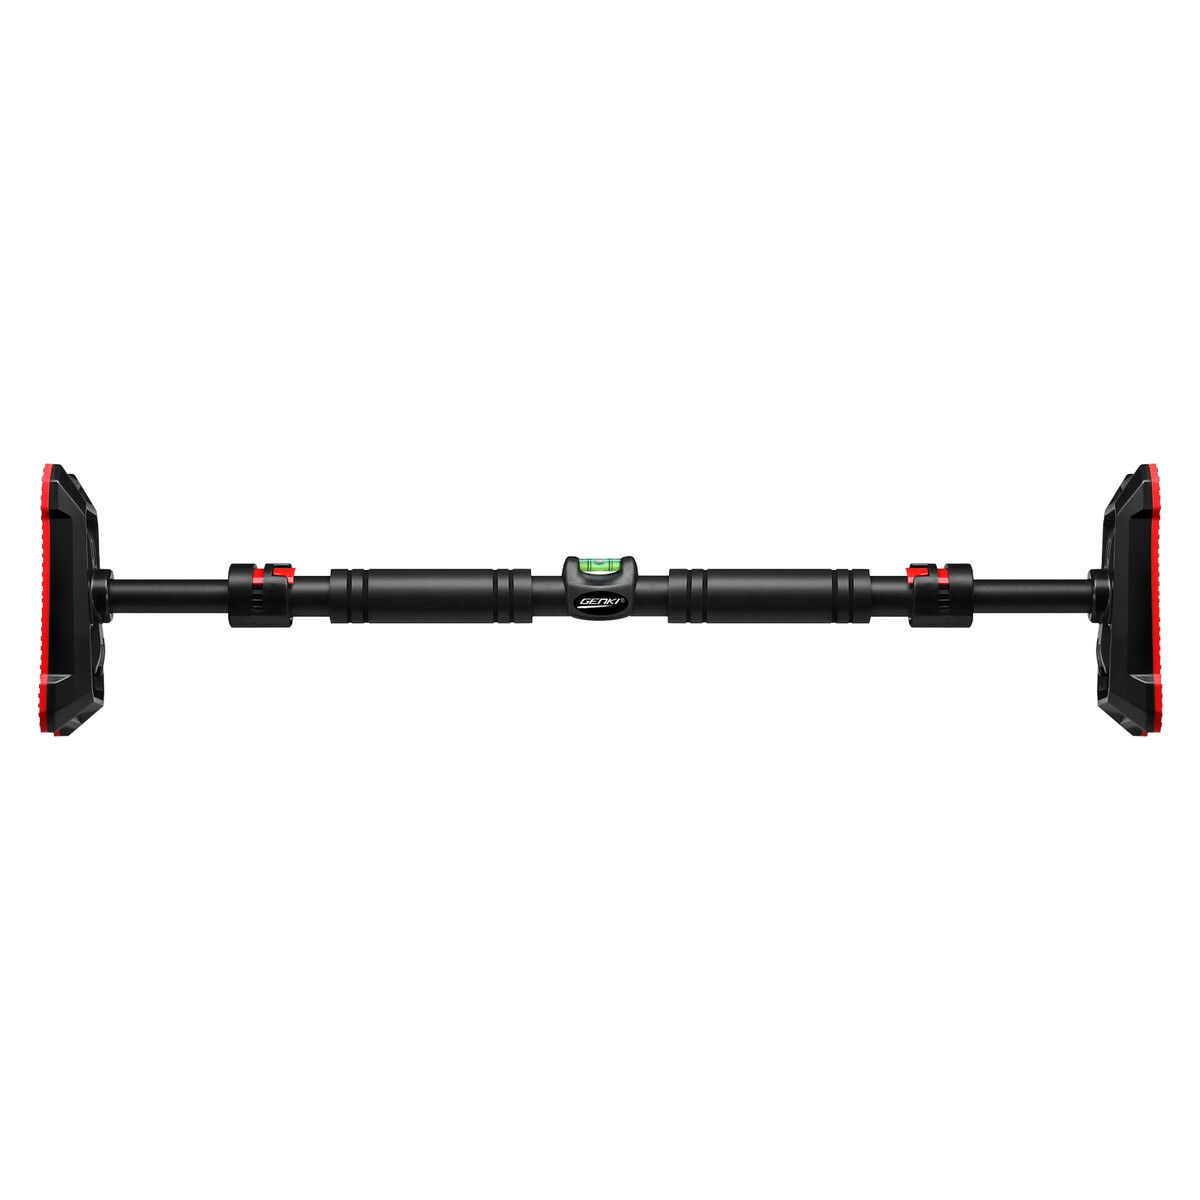 Genki Adjustable Horizontal Pull-Up Bar - Two Sizes Available